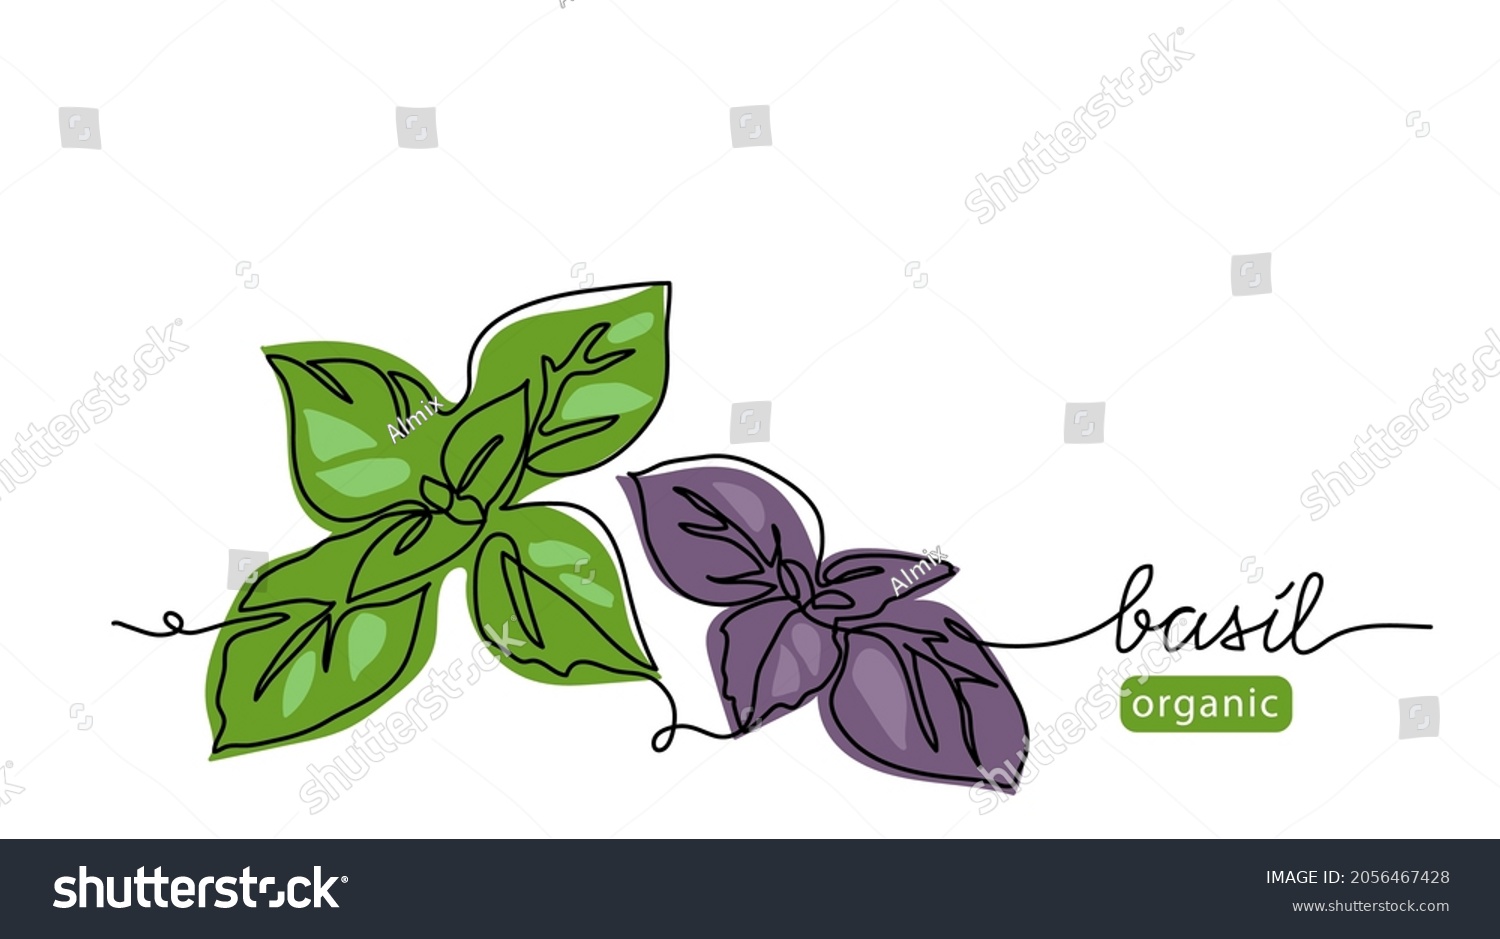 Basil leaves simple vector sketch drawing. One continuous line art illustration for background or pesto sauce label design with lettering basil. #2056467428